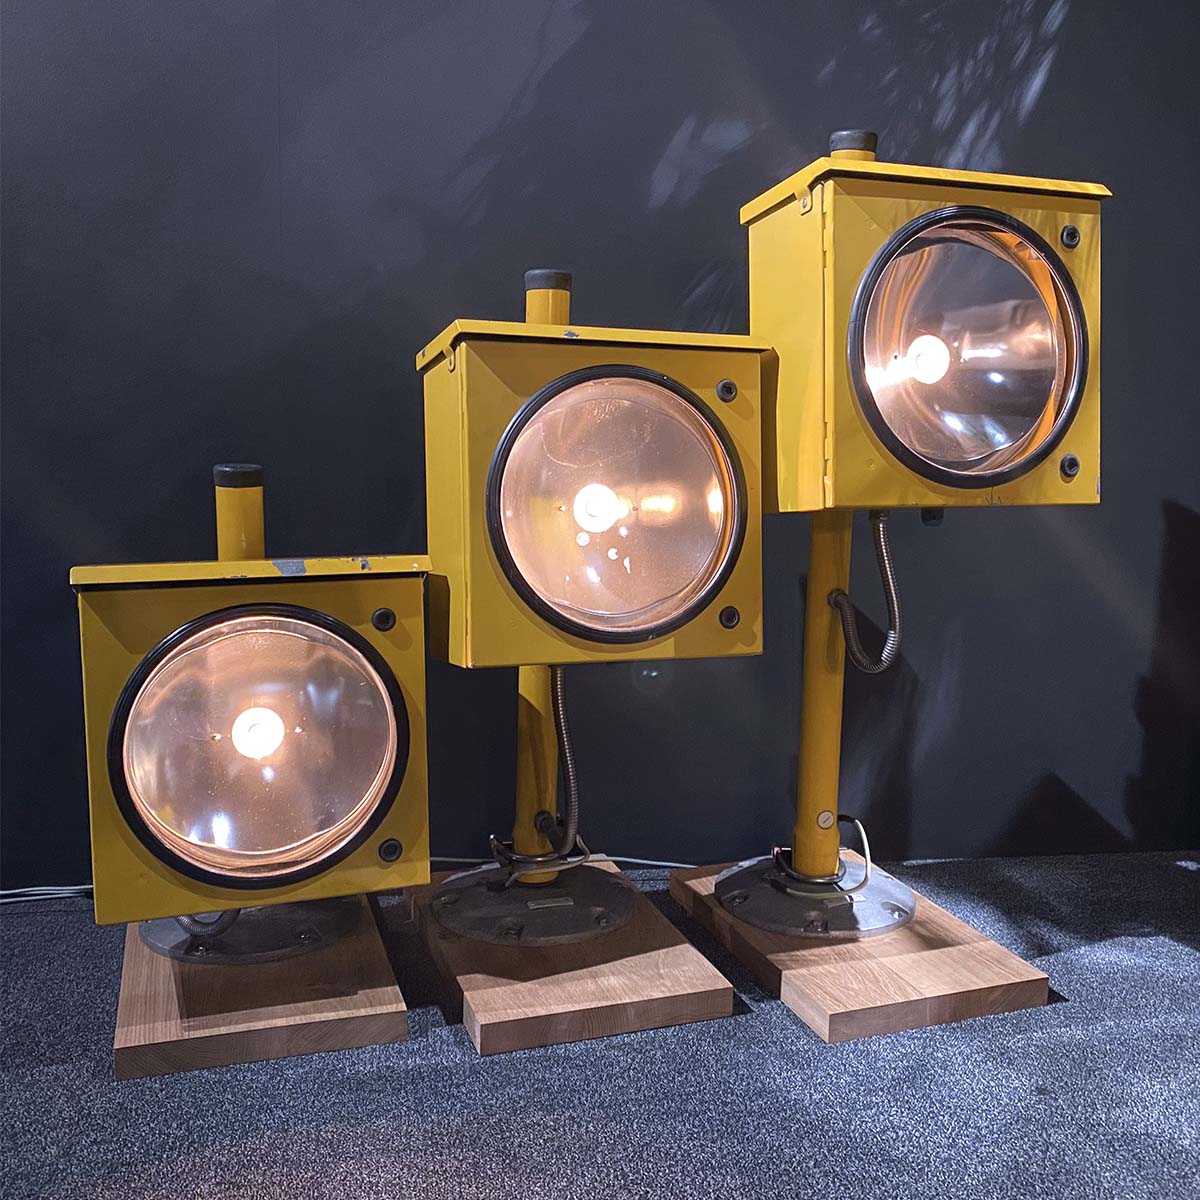 Three approach sequence flash lights (type Honeywell ASL-40) installed on oak bases as interior lights for sale.